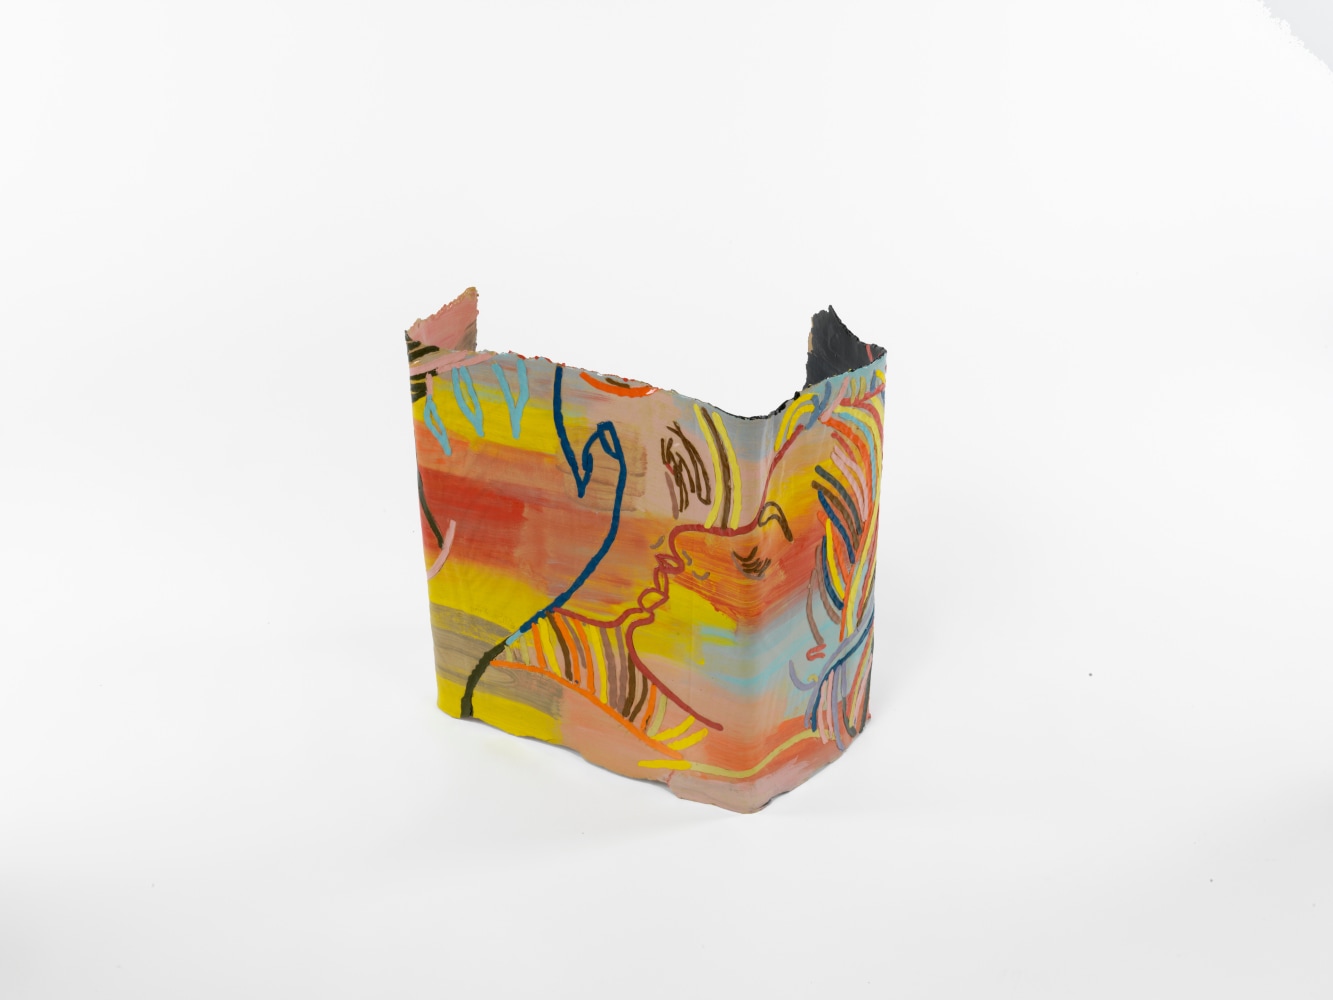 Ghada Amer (b. 1963) Box in Color, 2015 Glazed stoneware with porcelain inlay and porcelain slip 23.5 x 20 x 16 inches 59.7 x 50.8 x 40.6 cm